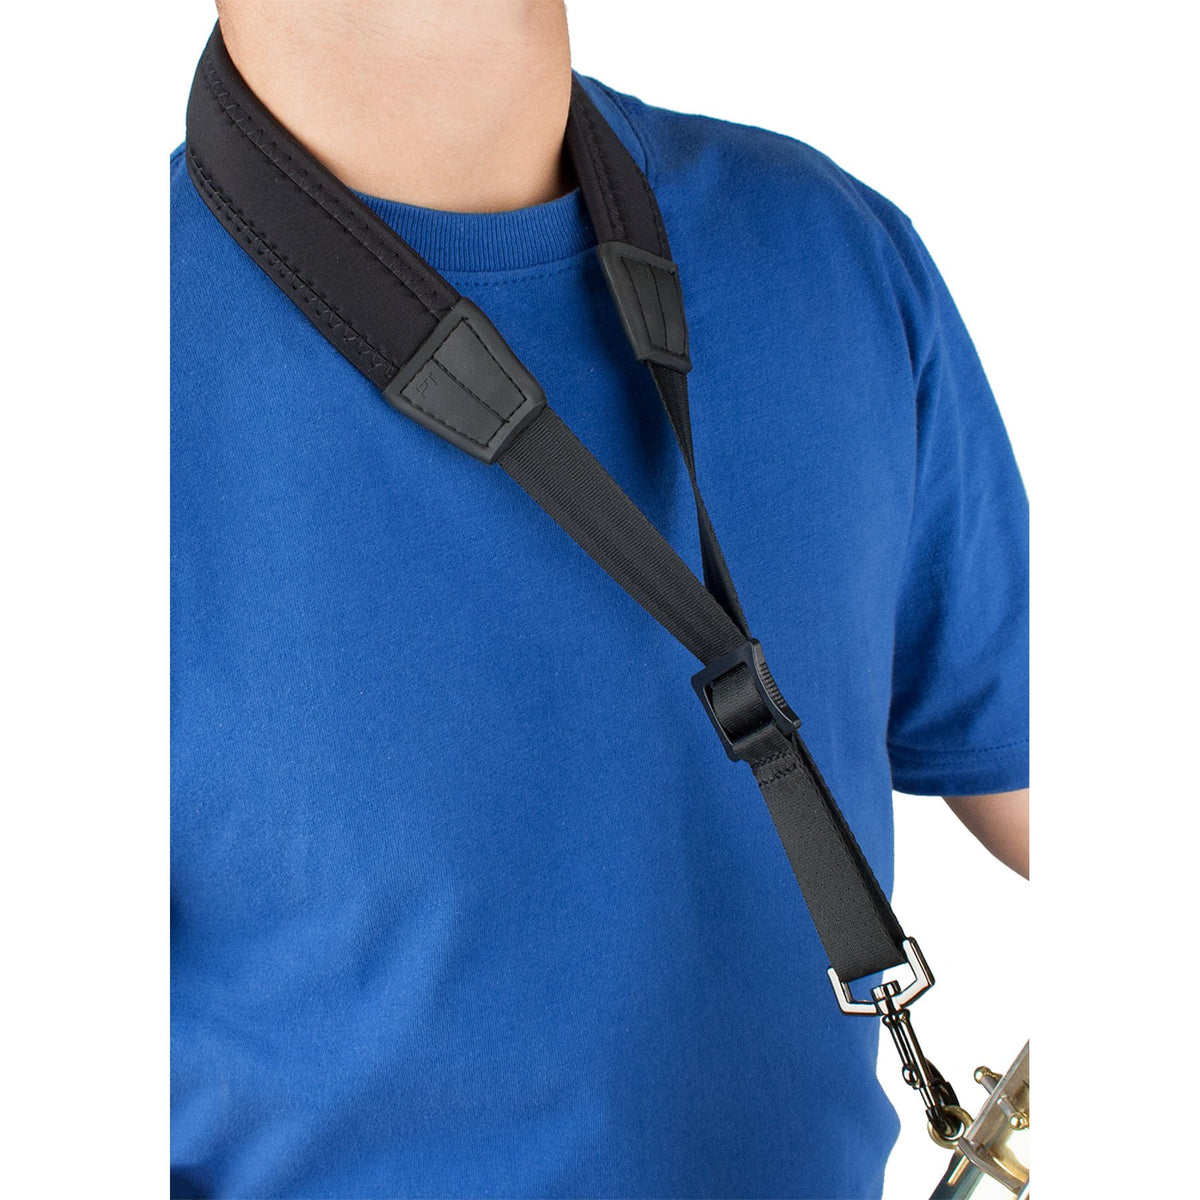 Protec - Neoprene Saxophone Neck Strap with Metal Snap-Accessories-Protec-Music Elements